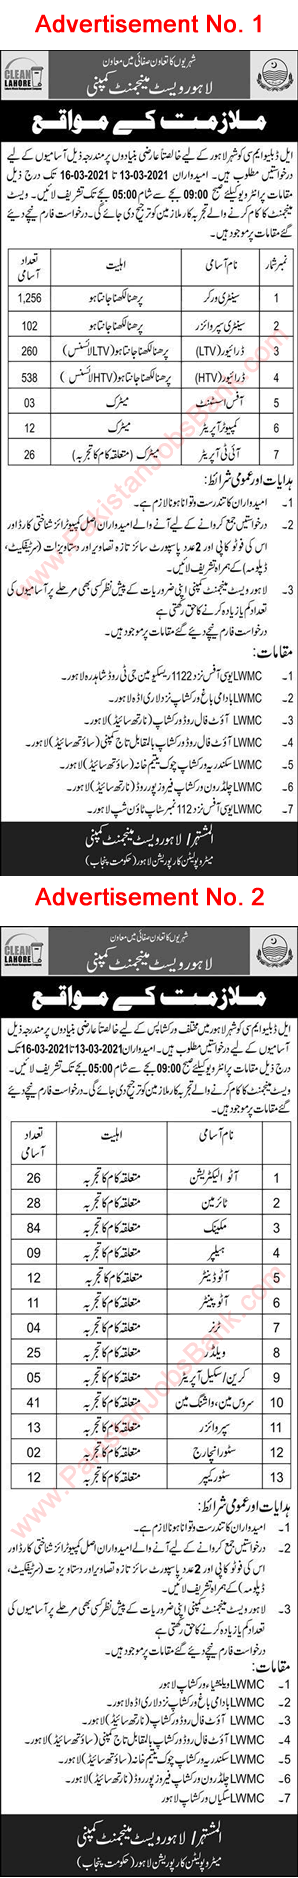 Lahore Waste Management Company Jobs March 2021 LWMC Sanitary Workers, Drivers & Others Latest